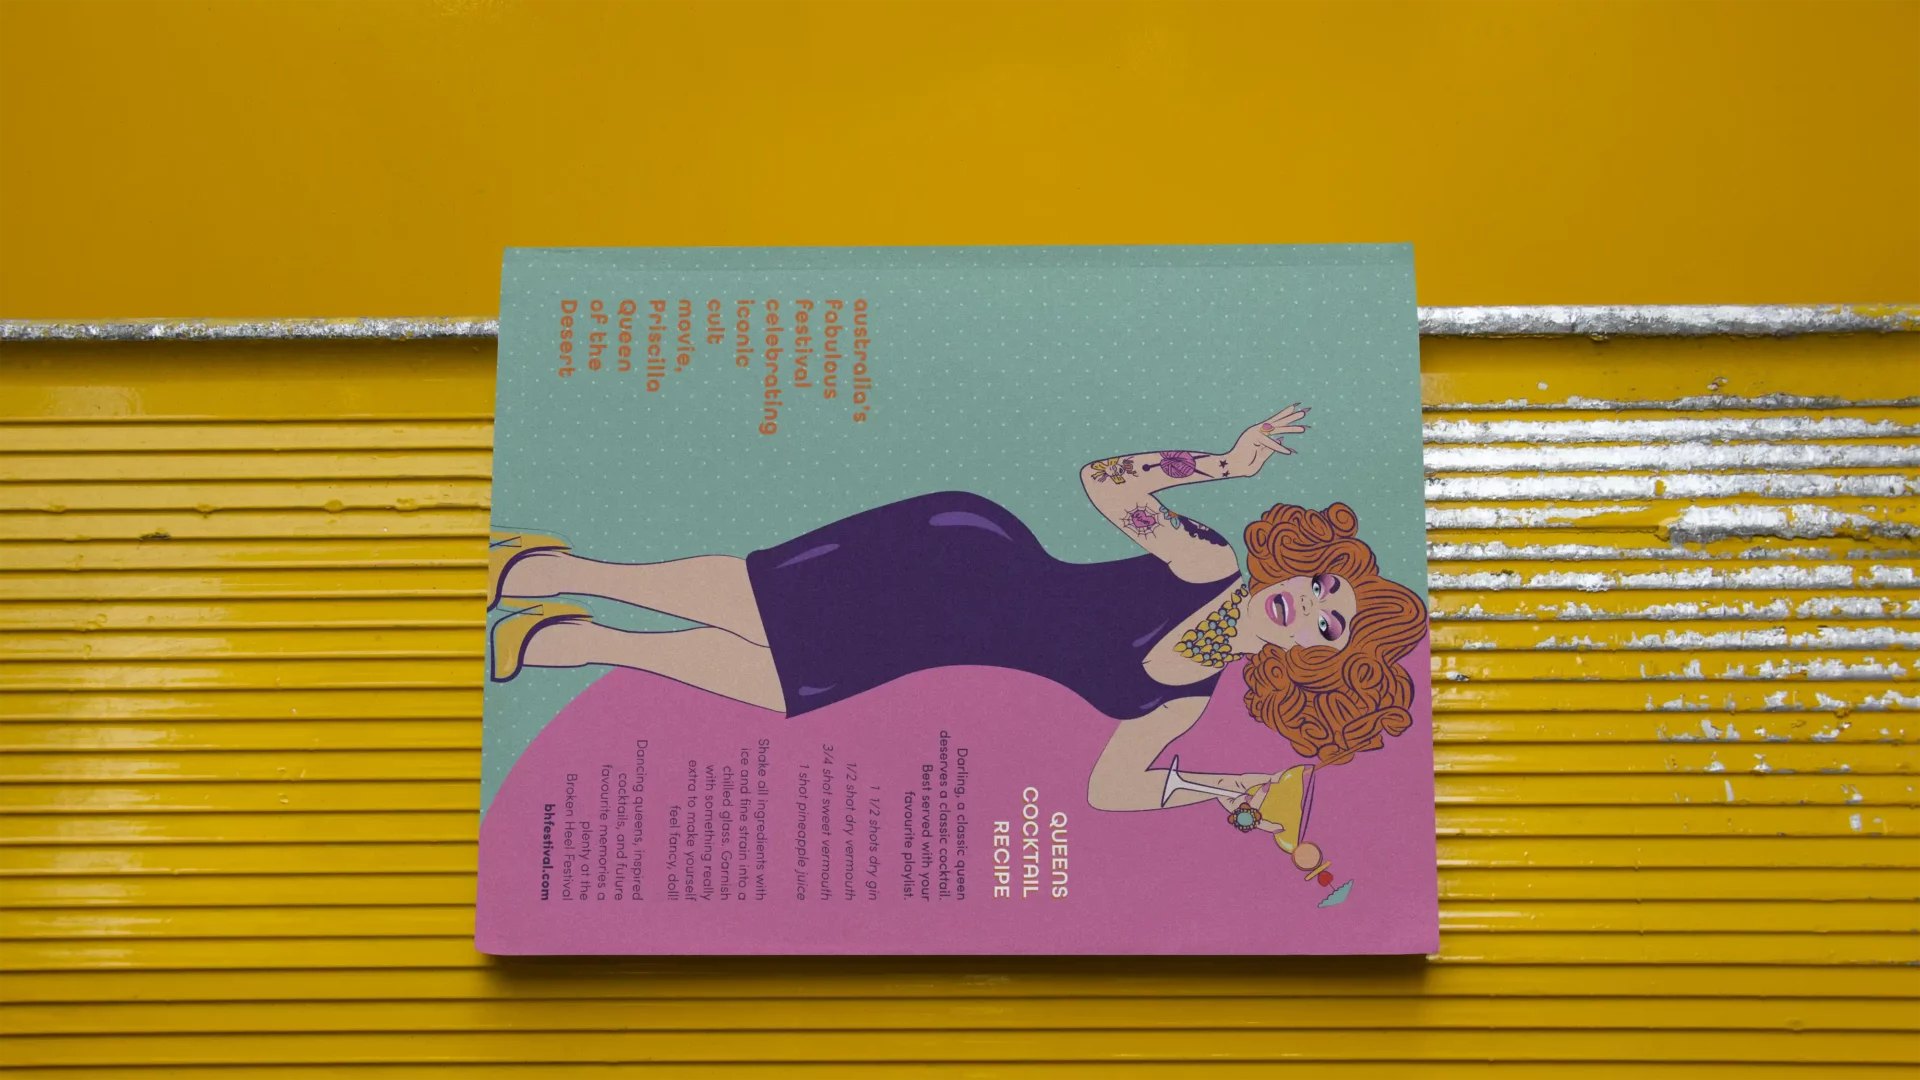 vibrant original festival branding featuring custom illustrations of performer in drag wearing fabulous oversized orange wig and classic lbd, in a stunning shade of purple, holding a summery cocktail and smiling widely. custom illustrated editorial spread.